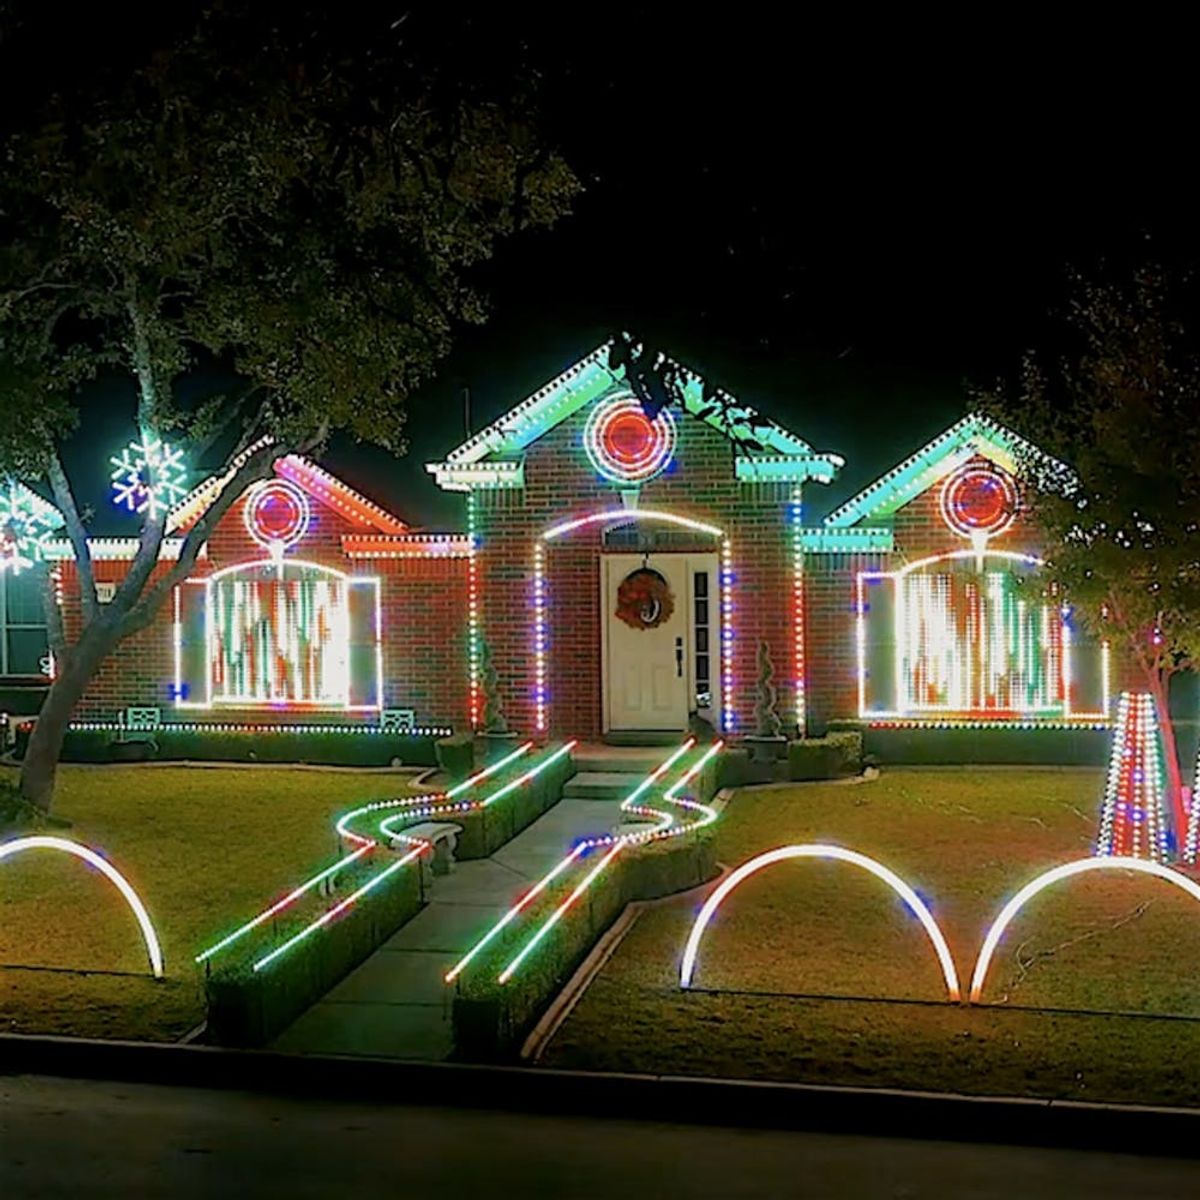 This Family’s Dubstep Christmas Light Show Is Absolutely Insane